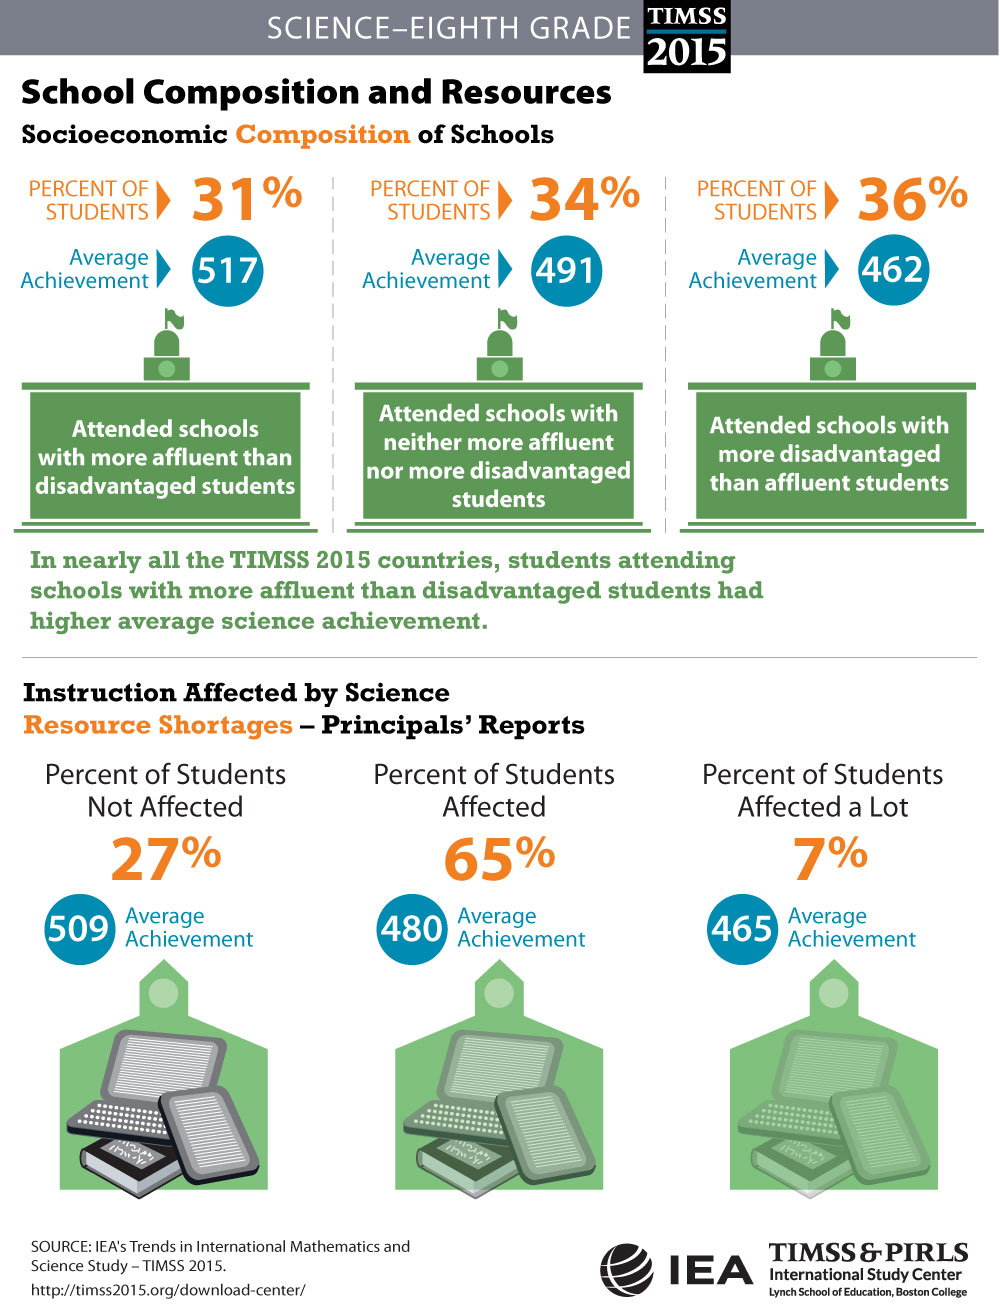 School Composition and Resources (G8) Infographic